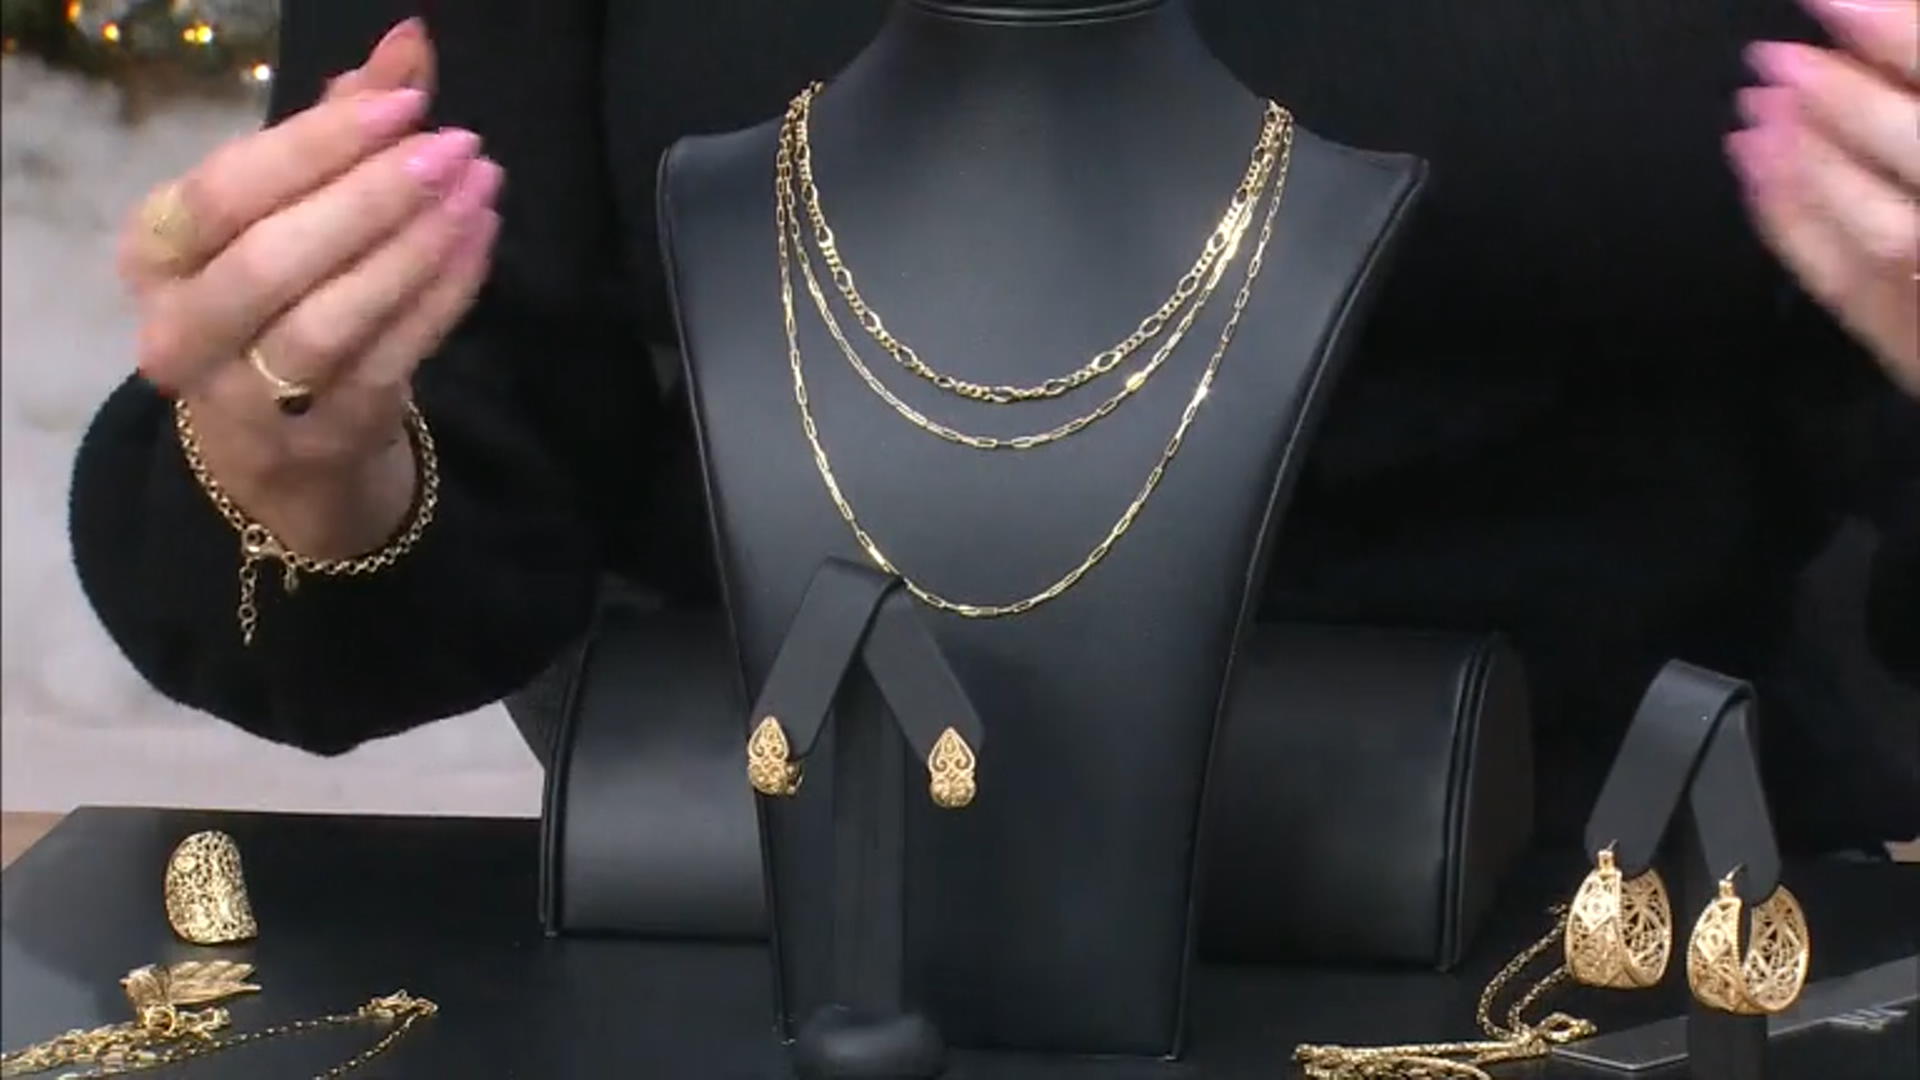 18k Yellow Gold Over Sterling Silver Figaro Chain Video Thumbnail